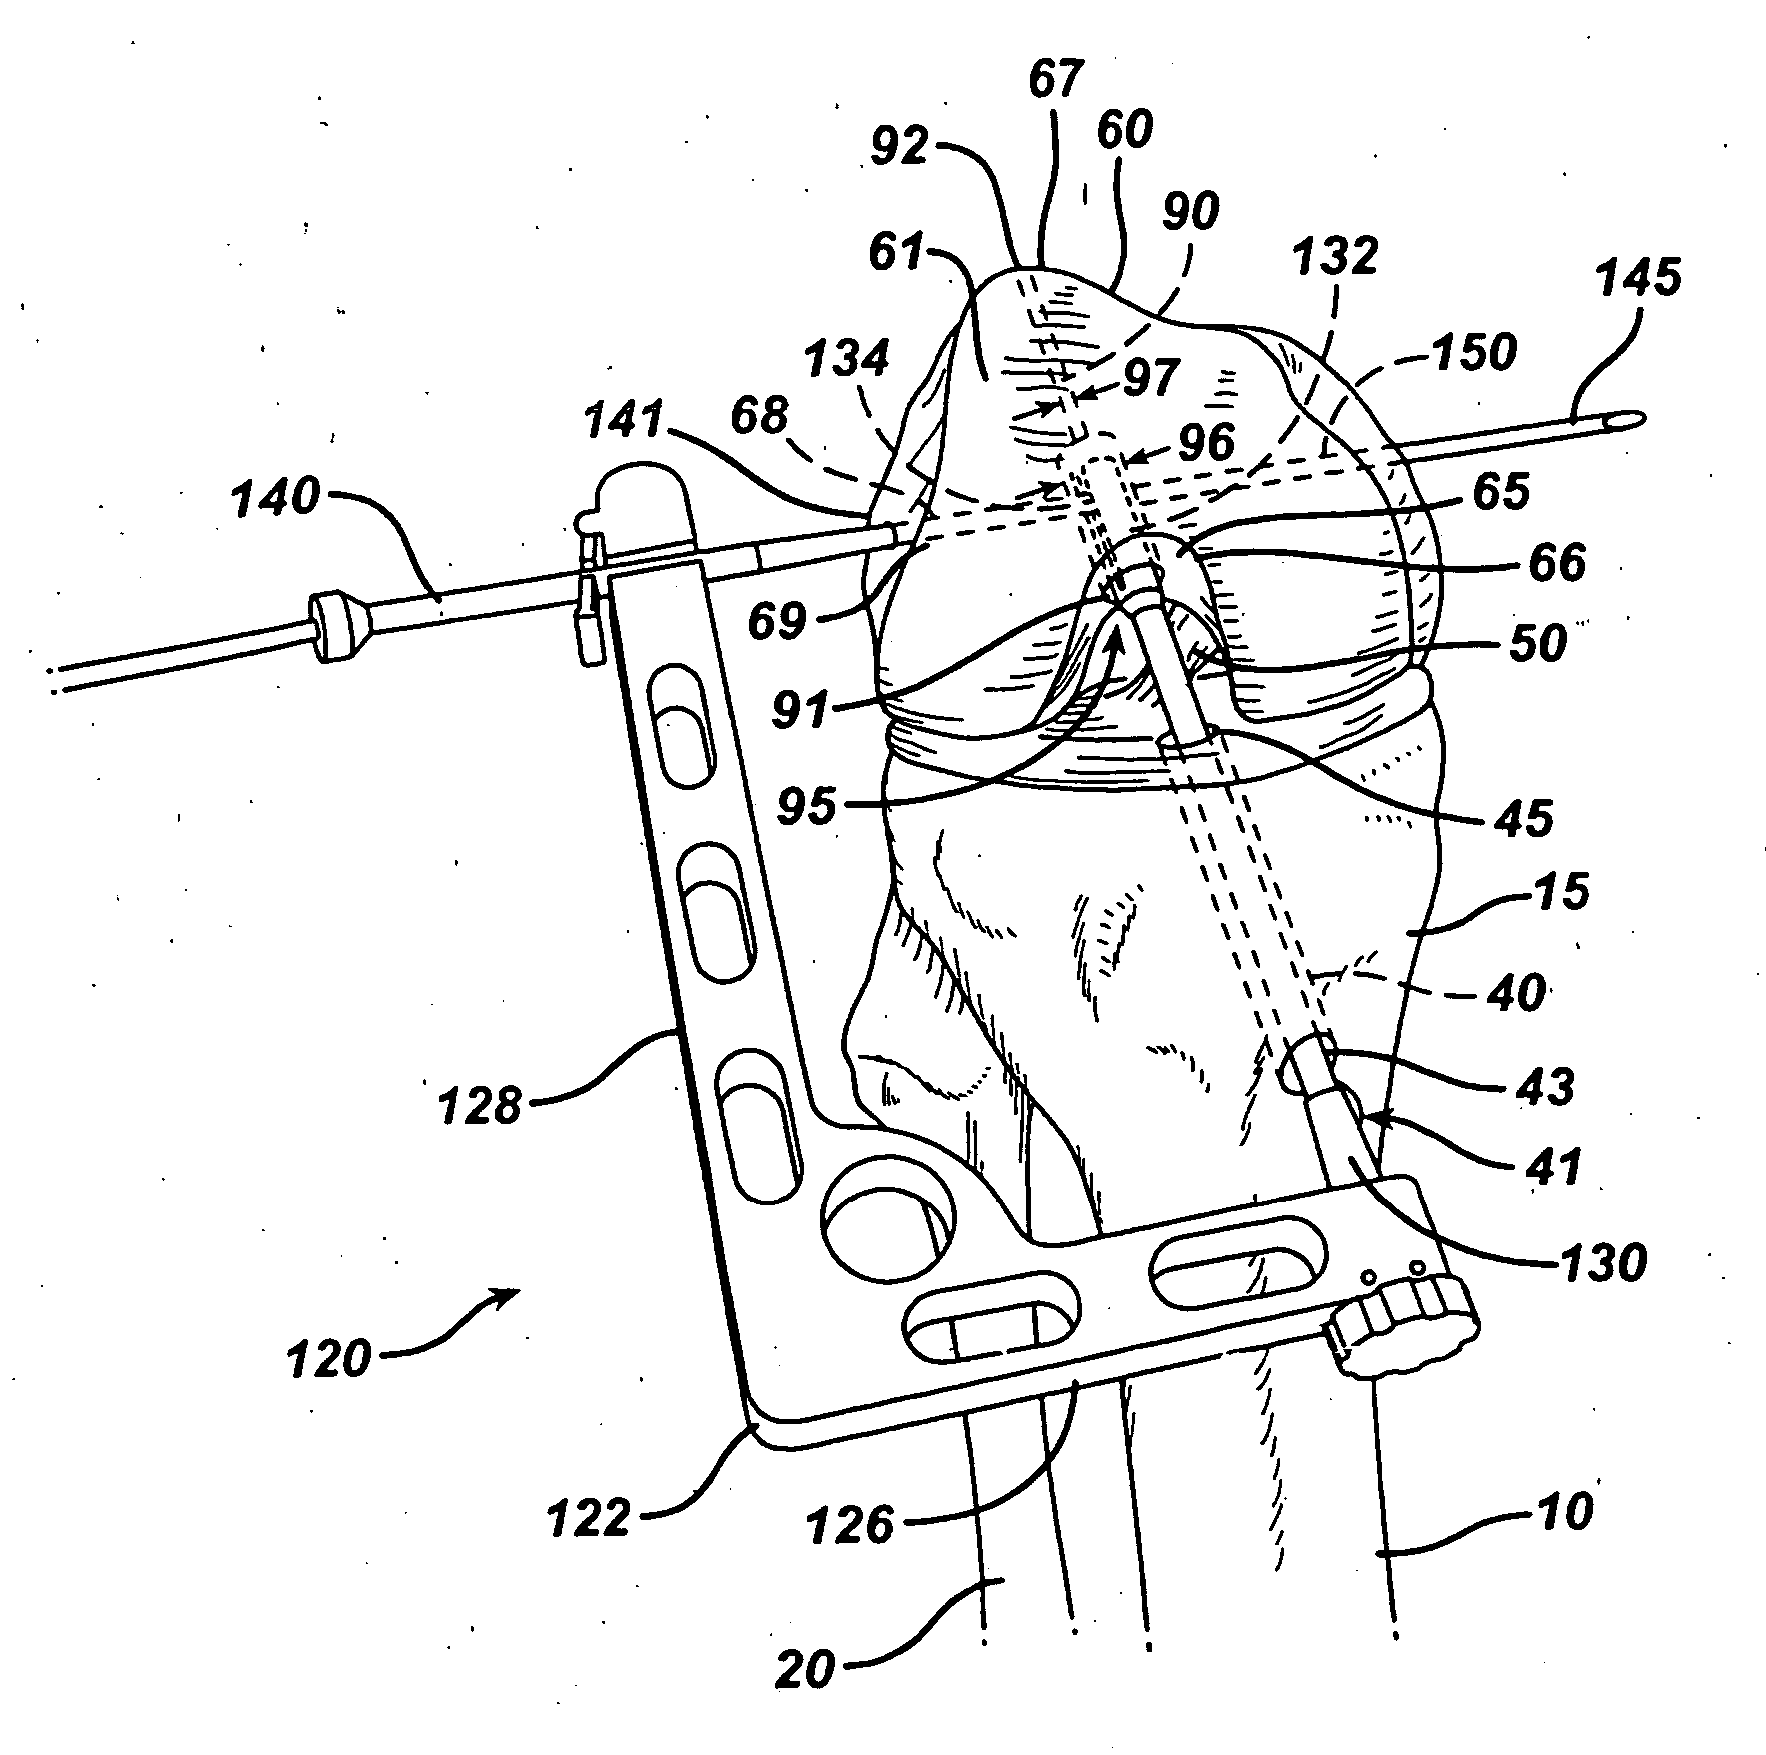 Method of replacing an anterior cruciate ligament in the knee